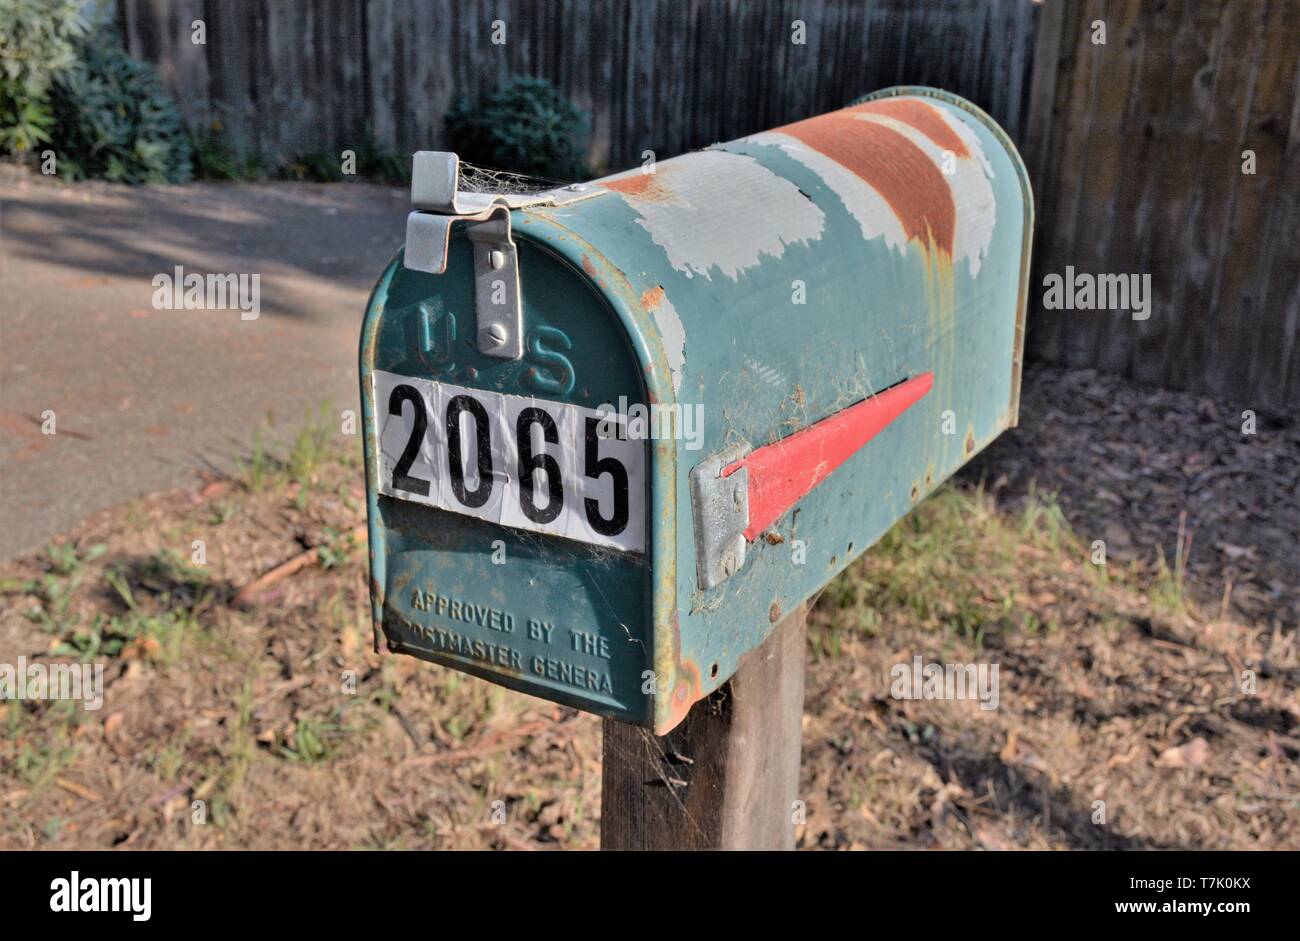 Rusting US Mailbox with number on it on rural route in US America USA Postal Service Stock Photo